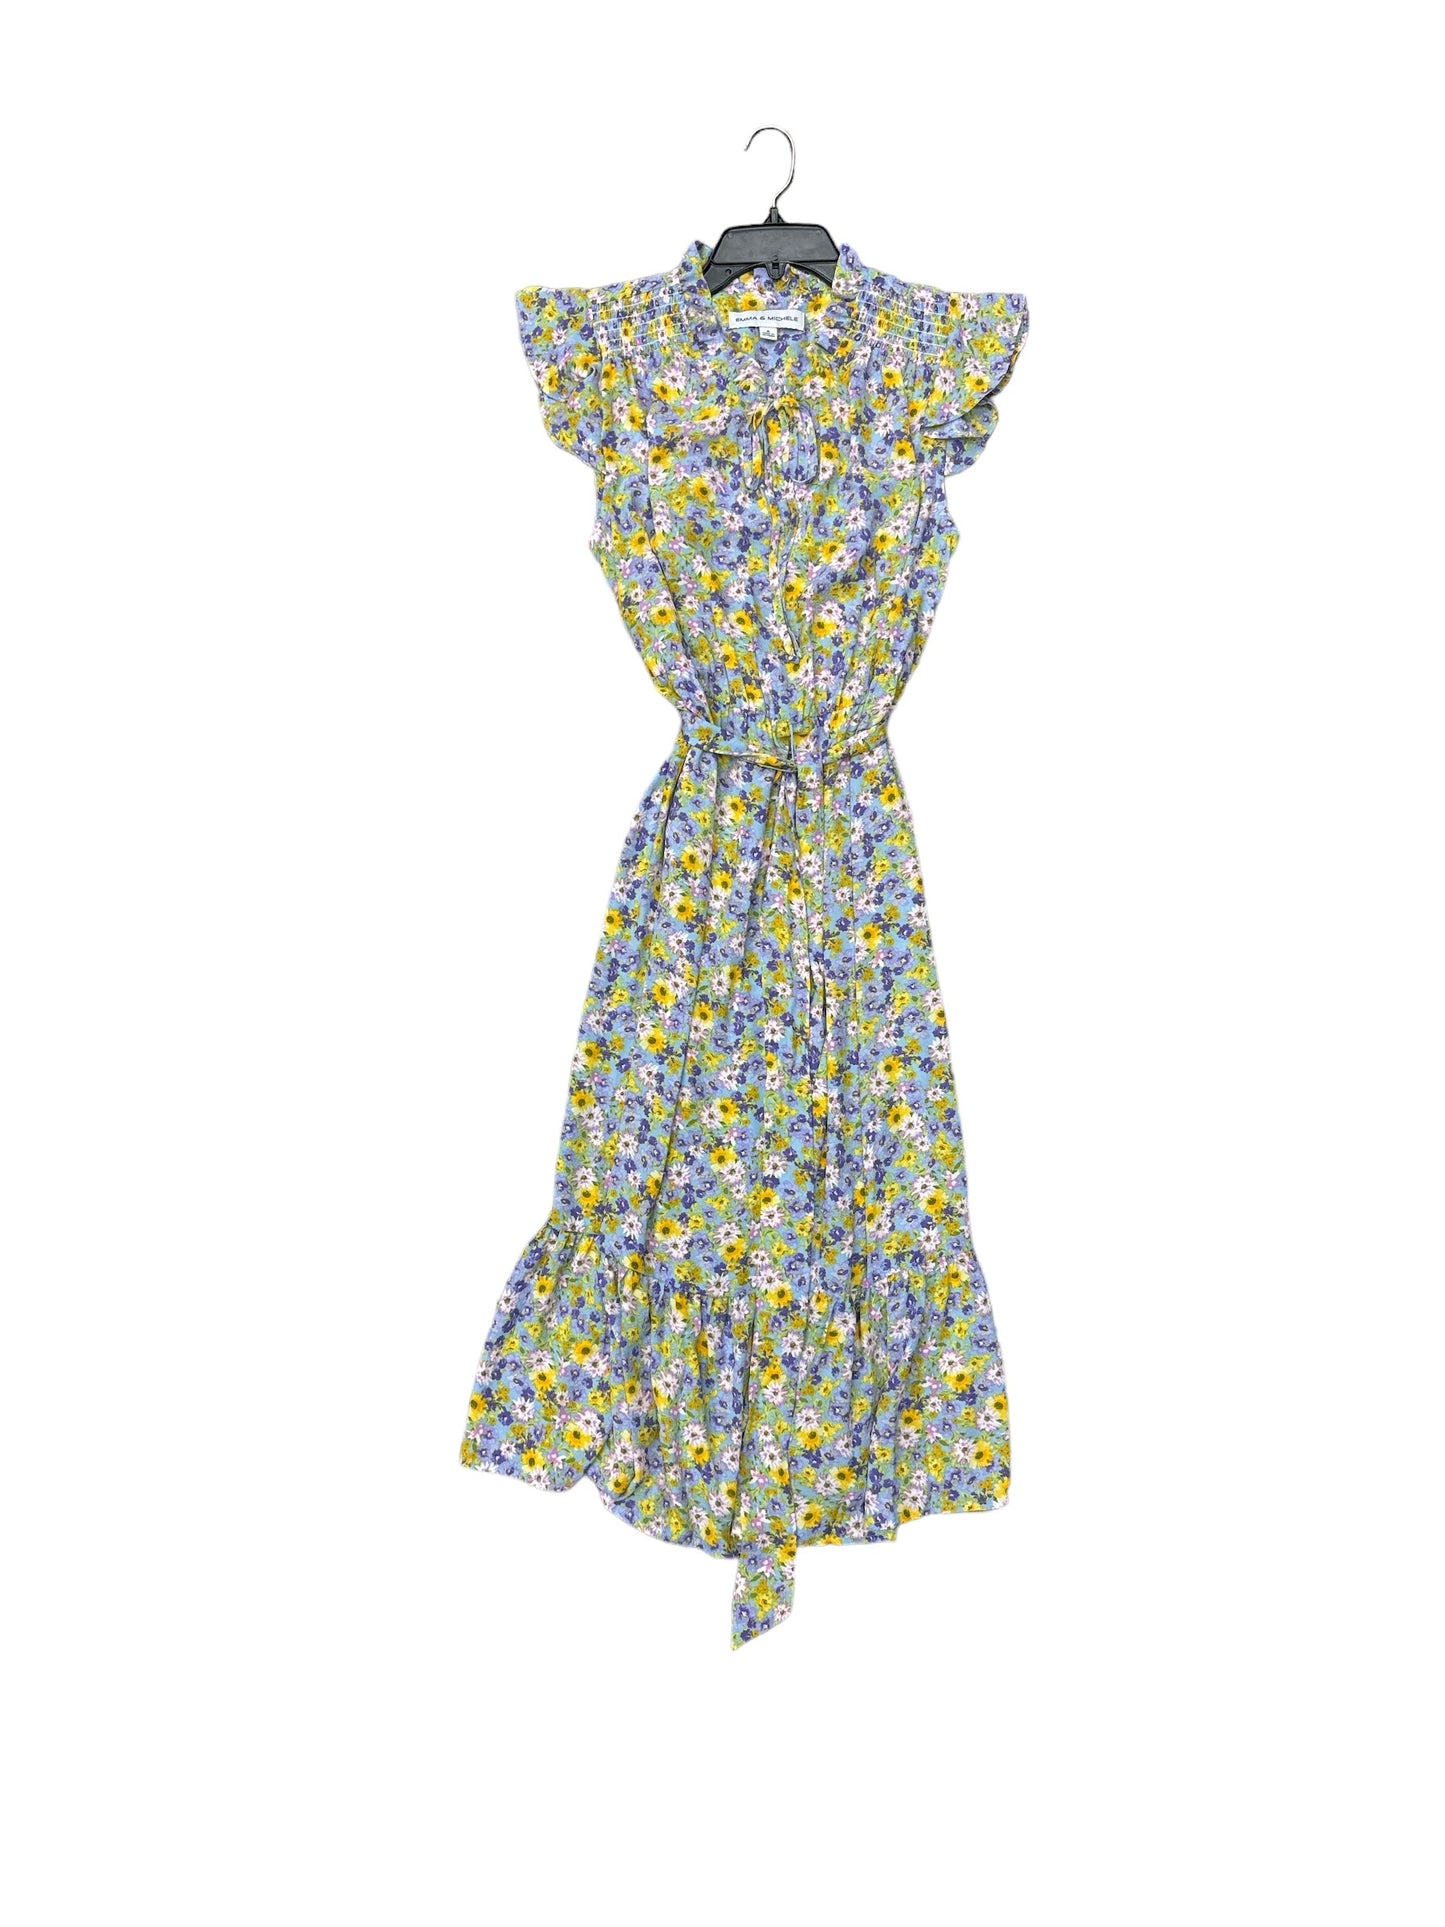 Floral Print Dress Casual Maxi Emma And Michele, Size 8